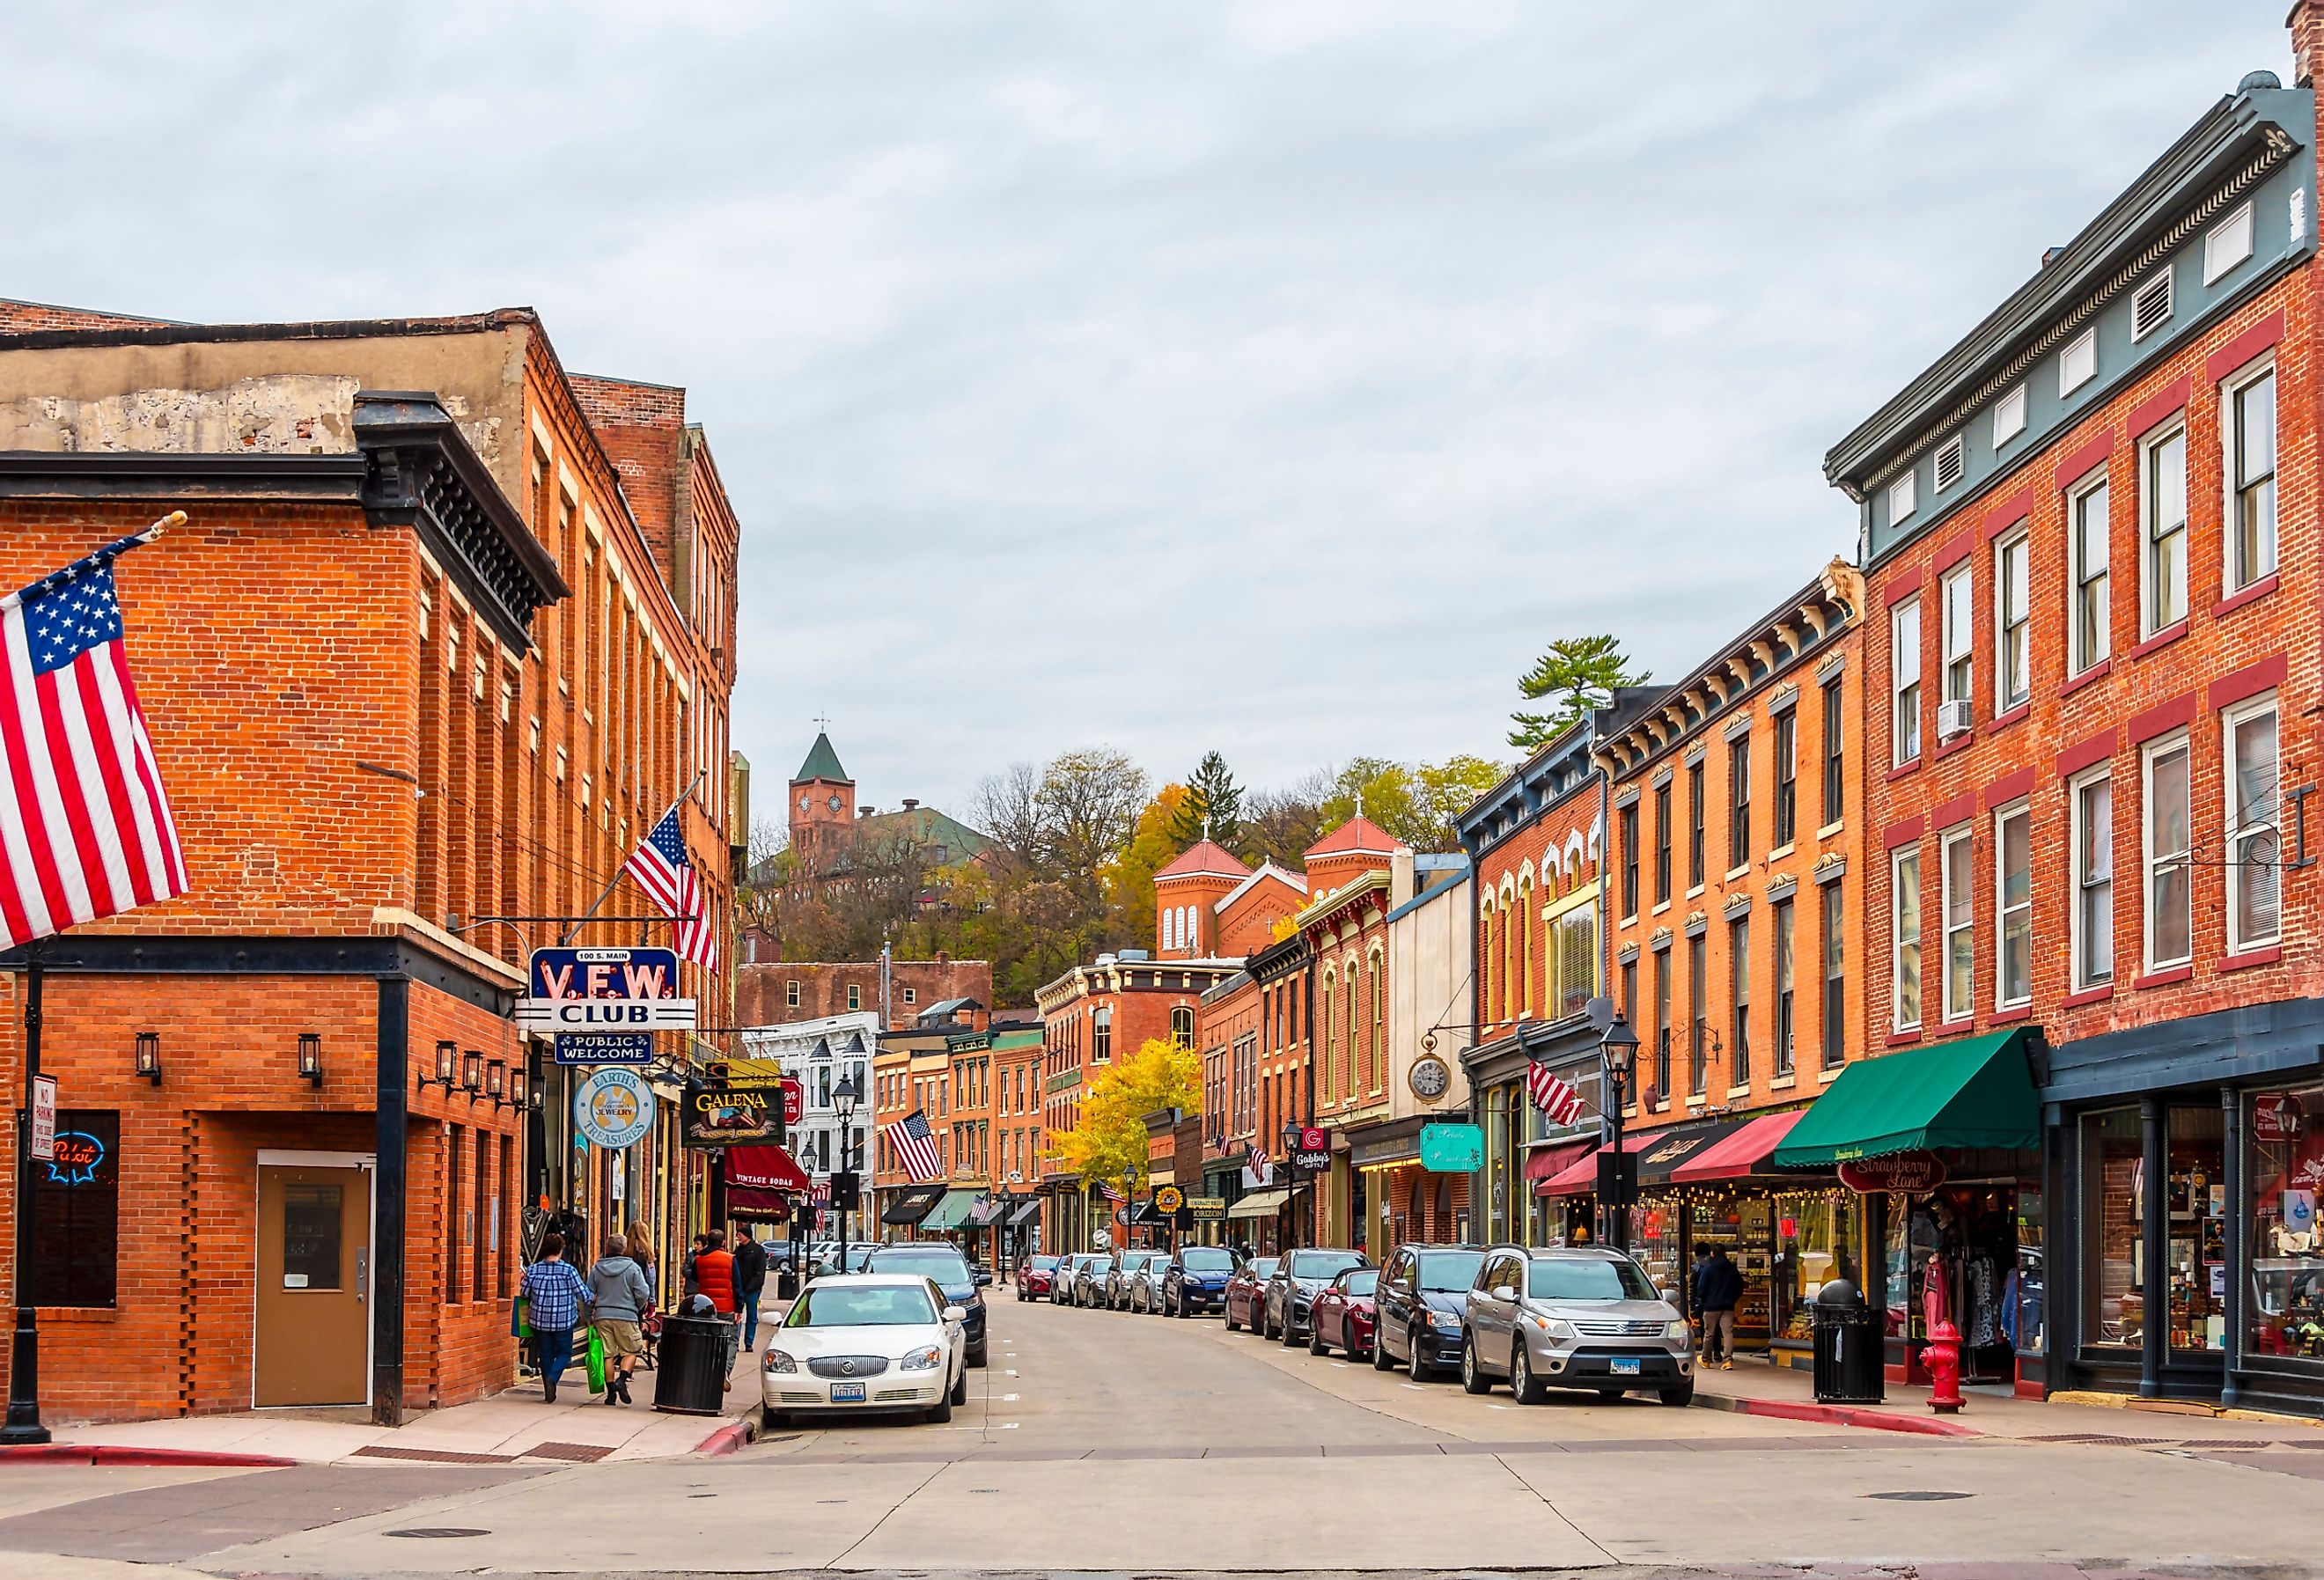 Historic district and Main Street in Galena, Illinois. Image credit Nejdet Duzen via Shutterstock.